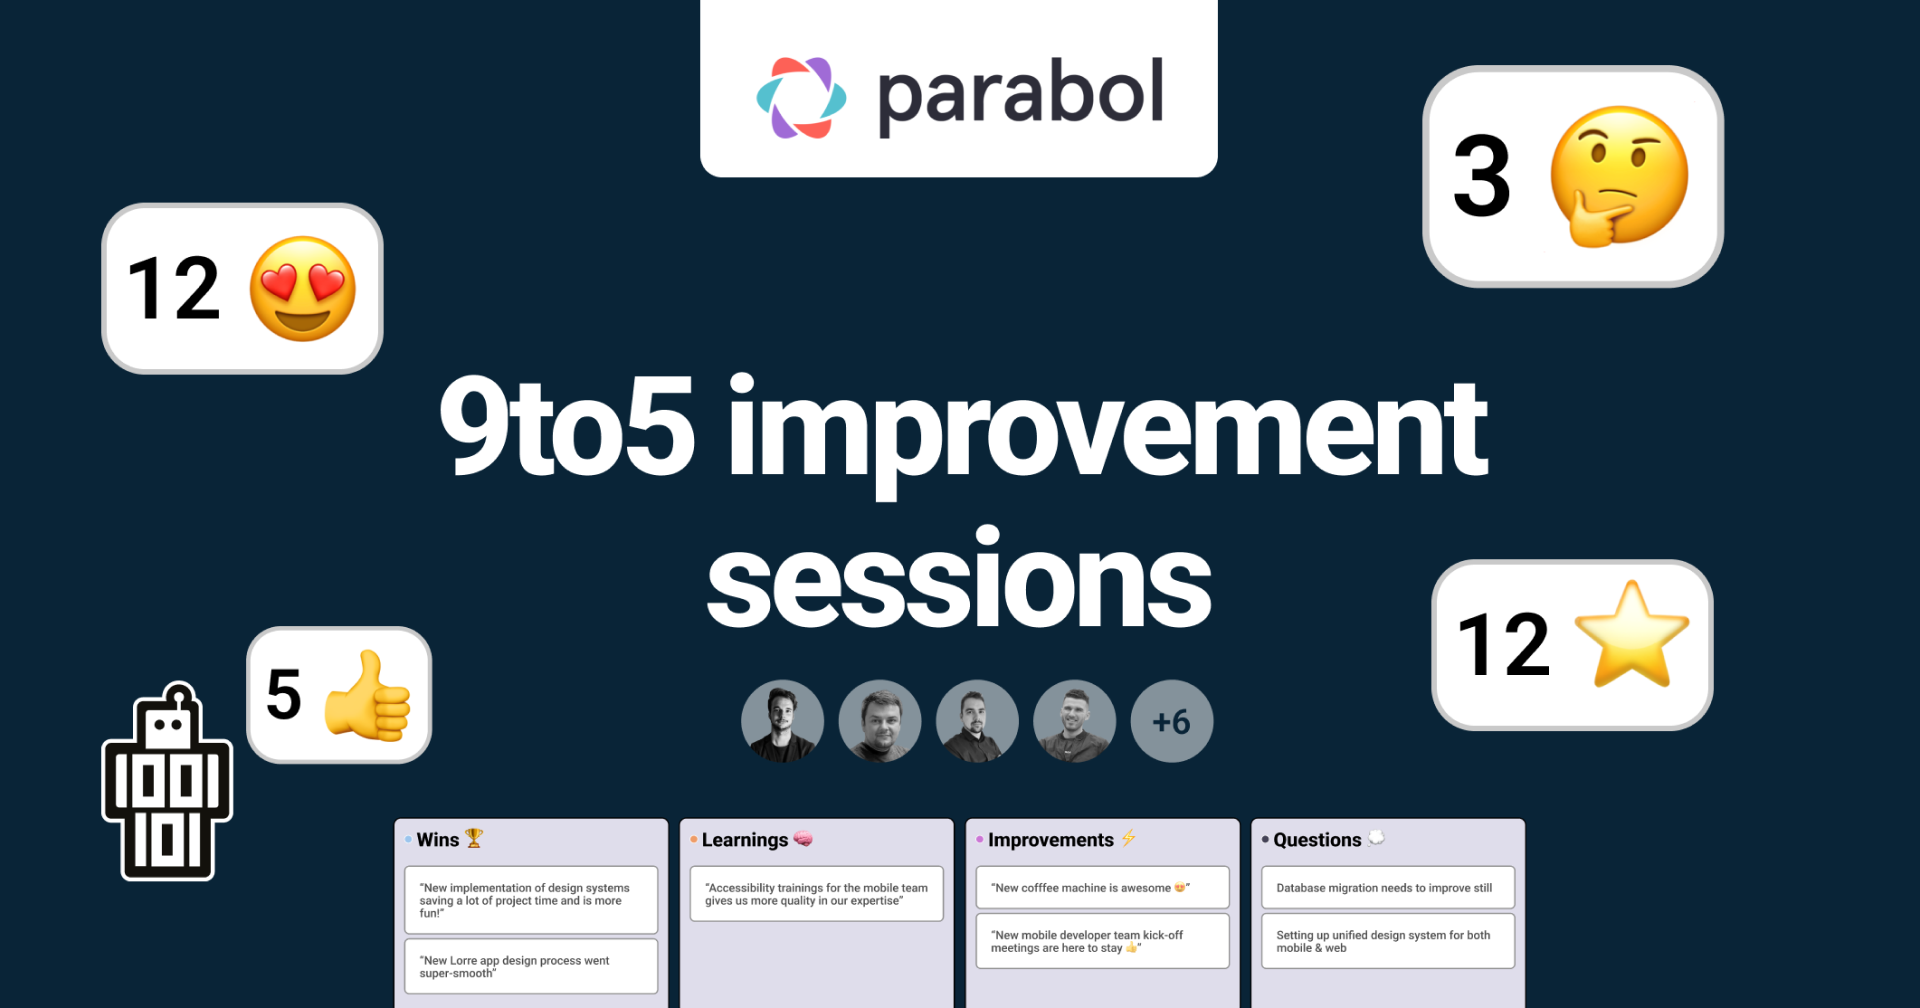 9to5 improvement sessions - To keep improving and growing, we now have the 9to5 Improvement Sessions!